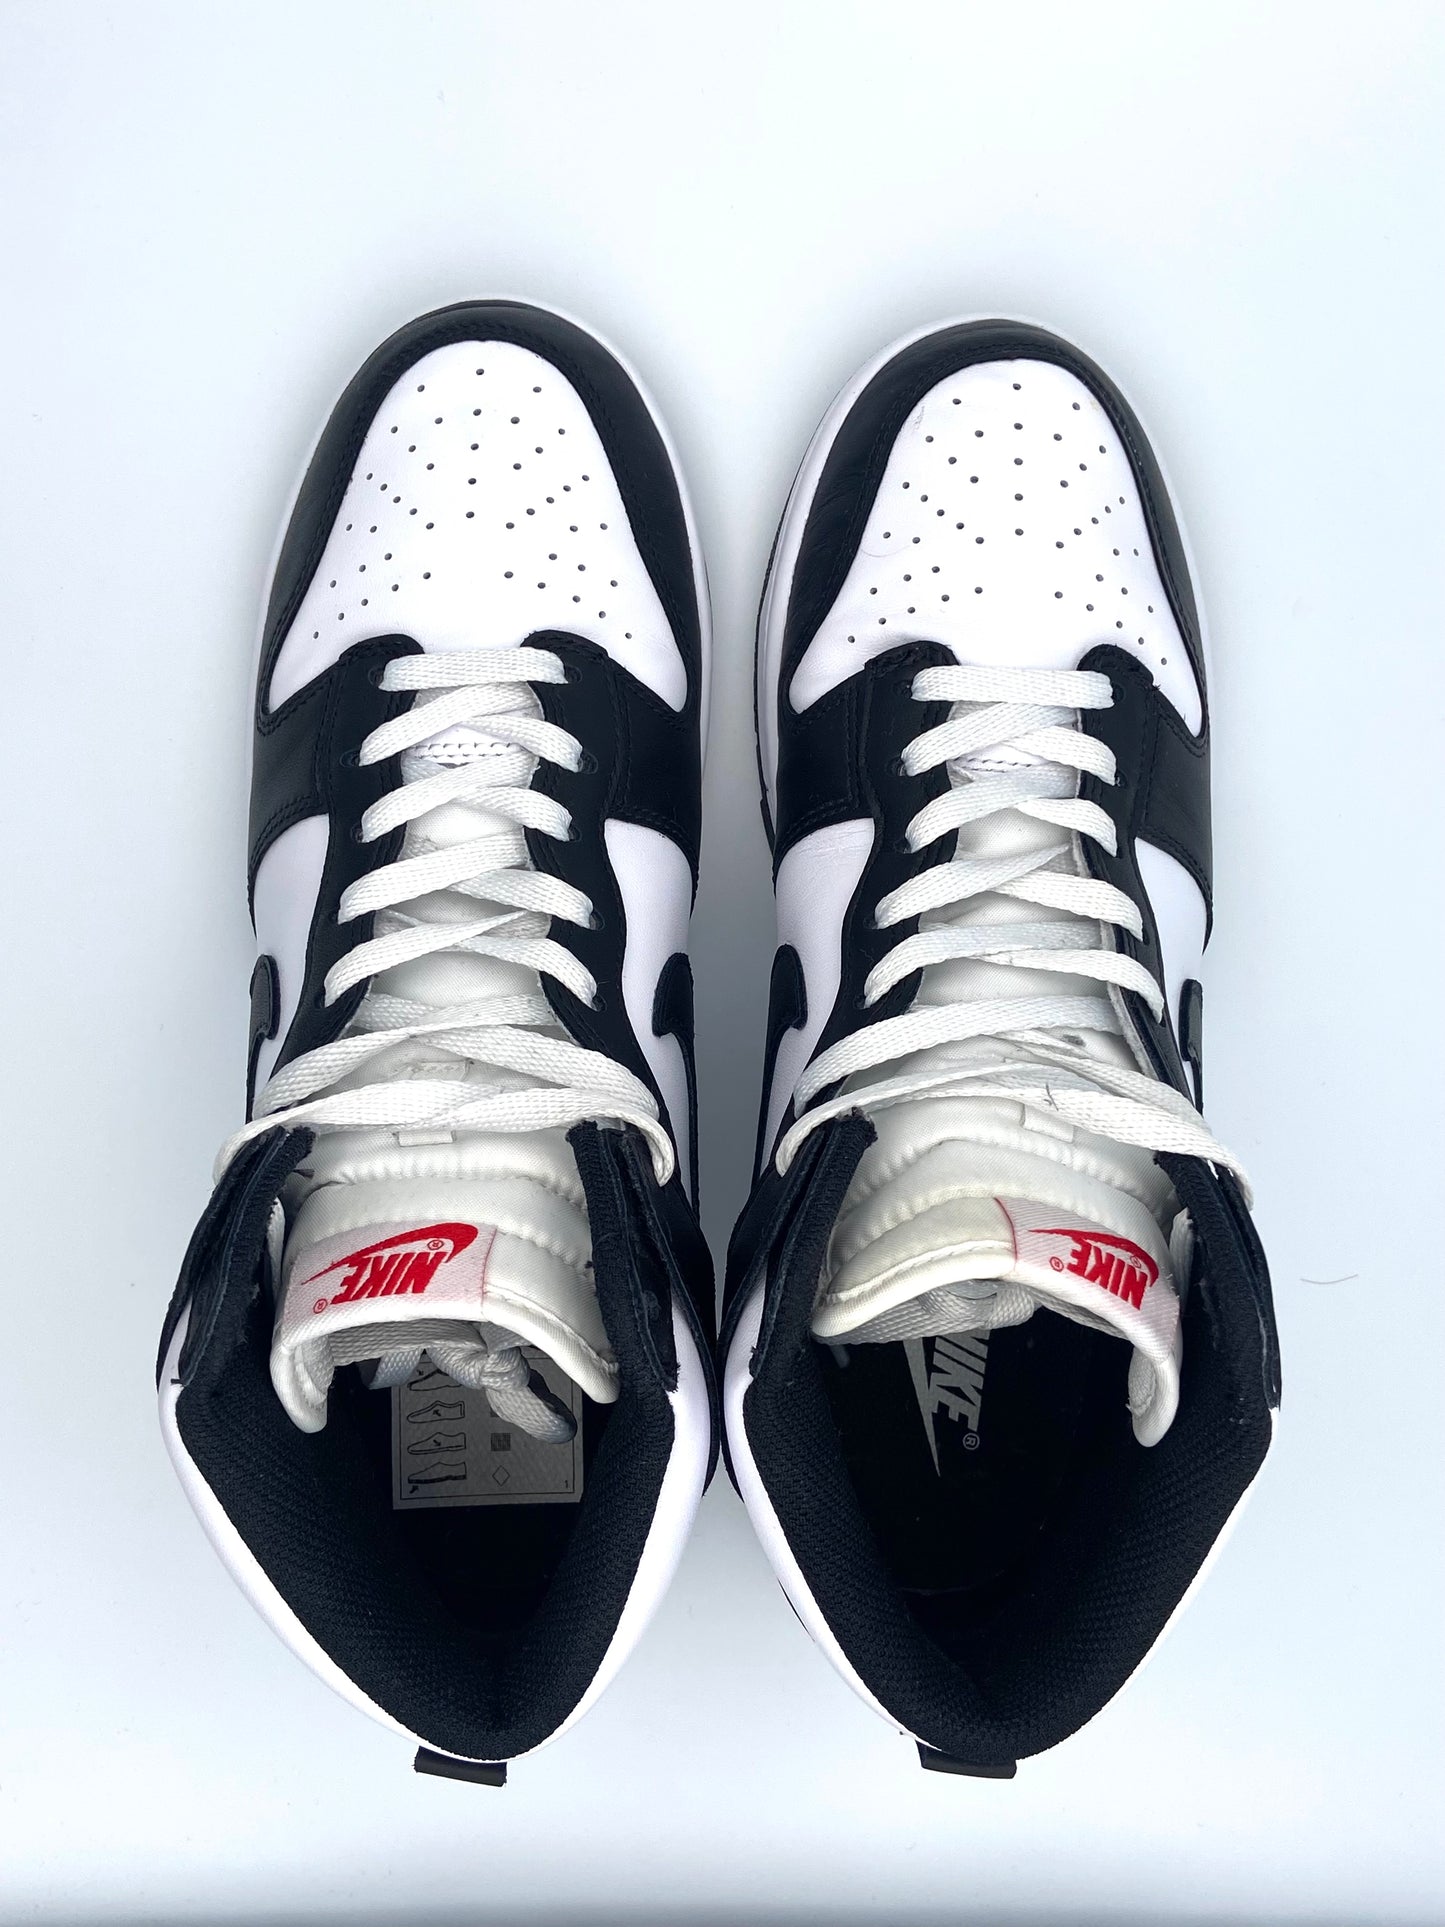 Nike Dunk High Black White - Red Label (used)